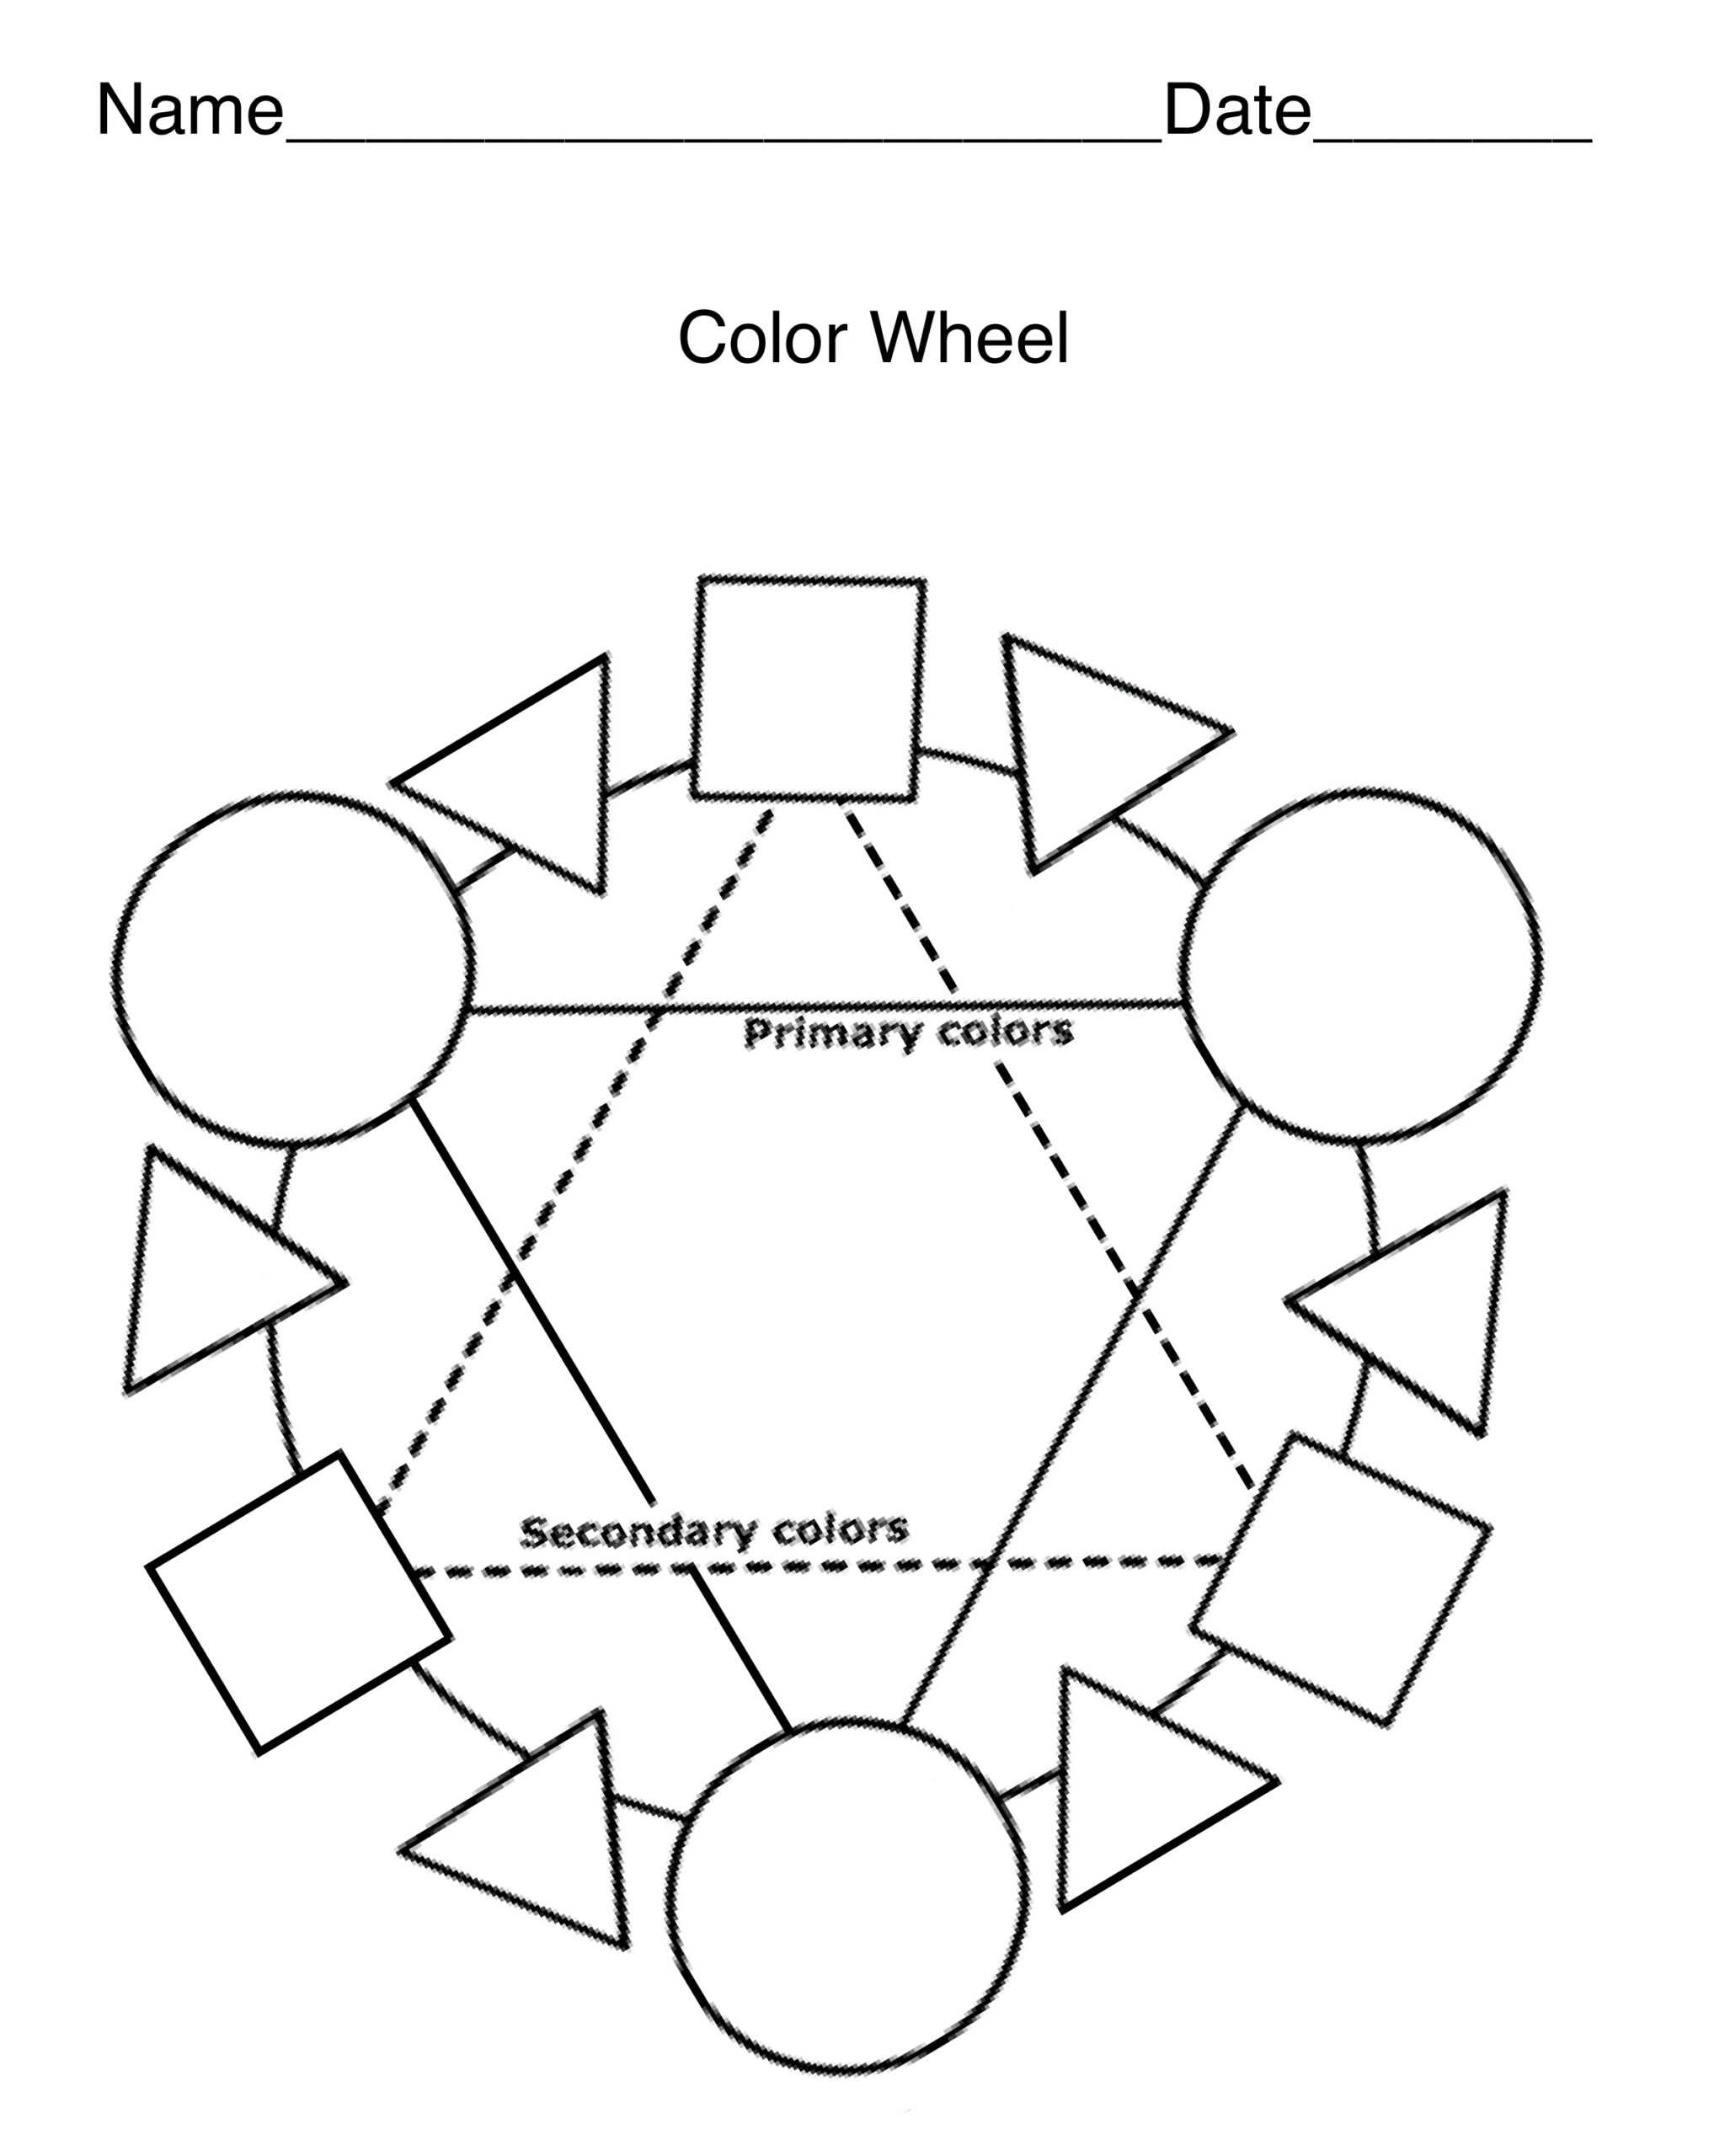 Blank Color Wheel Template. Tertiary Colors Blank Color With Blank Color Wheel Template